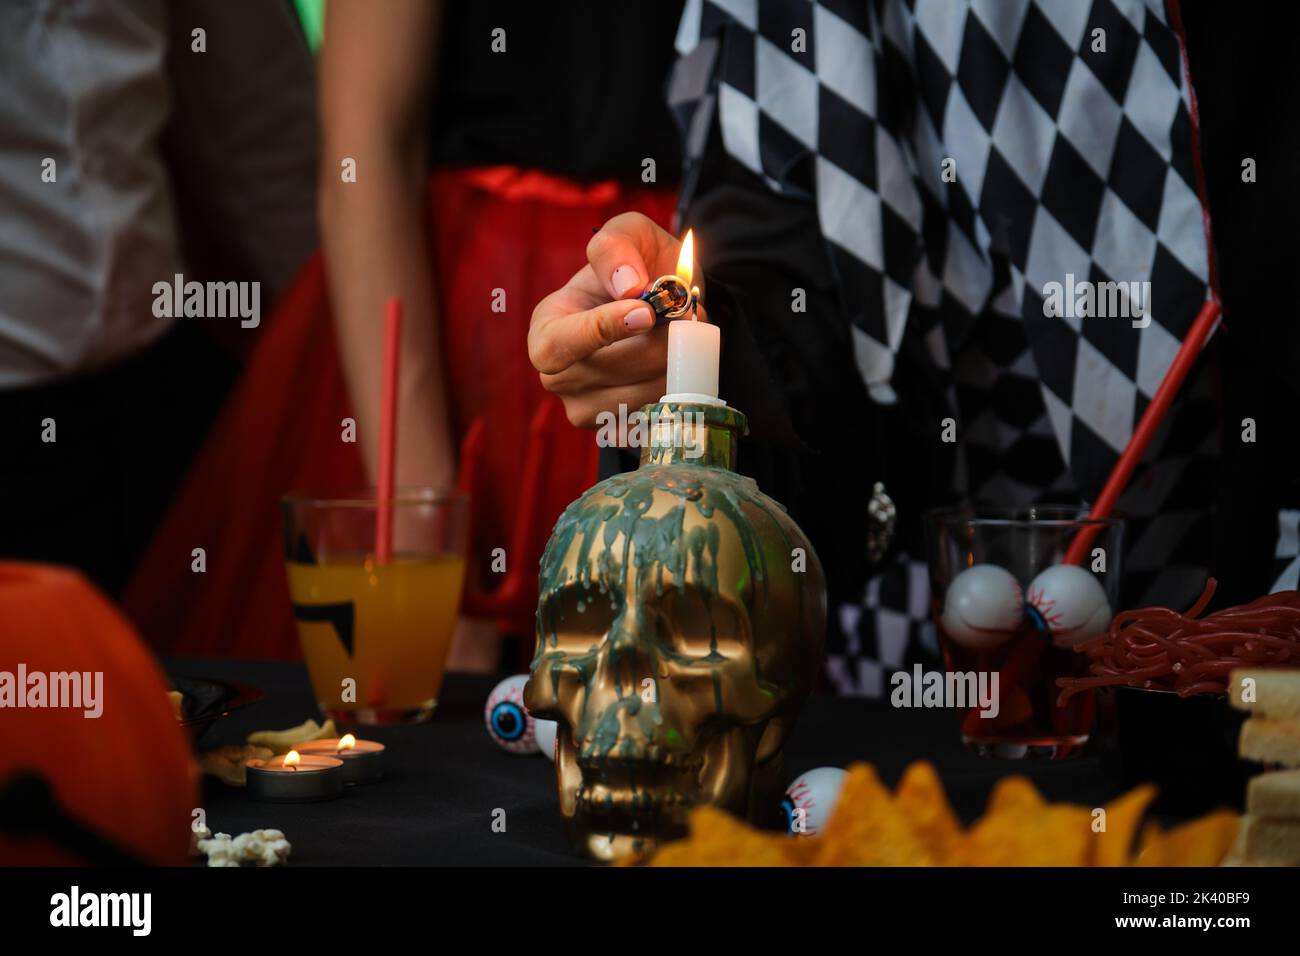 Woman lights a candle on a skull with a lighter at a Halloween party. Stock Photo